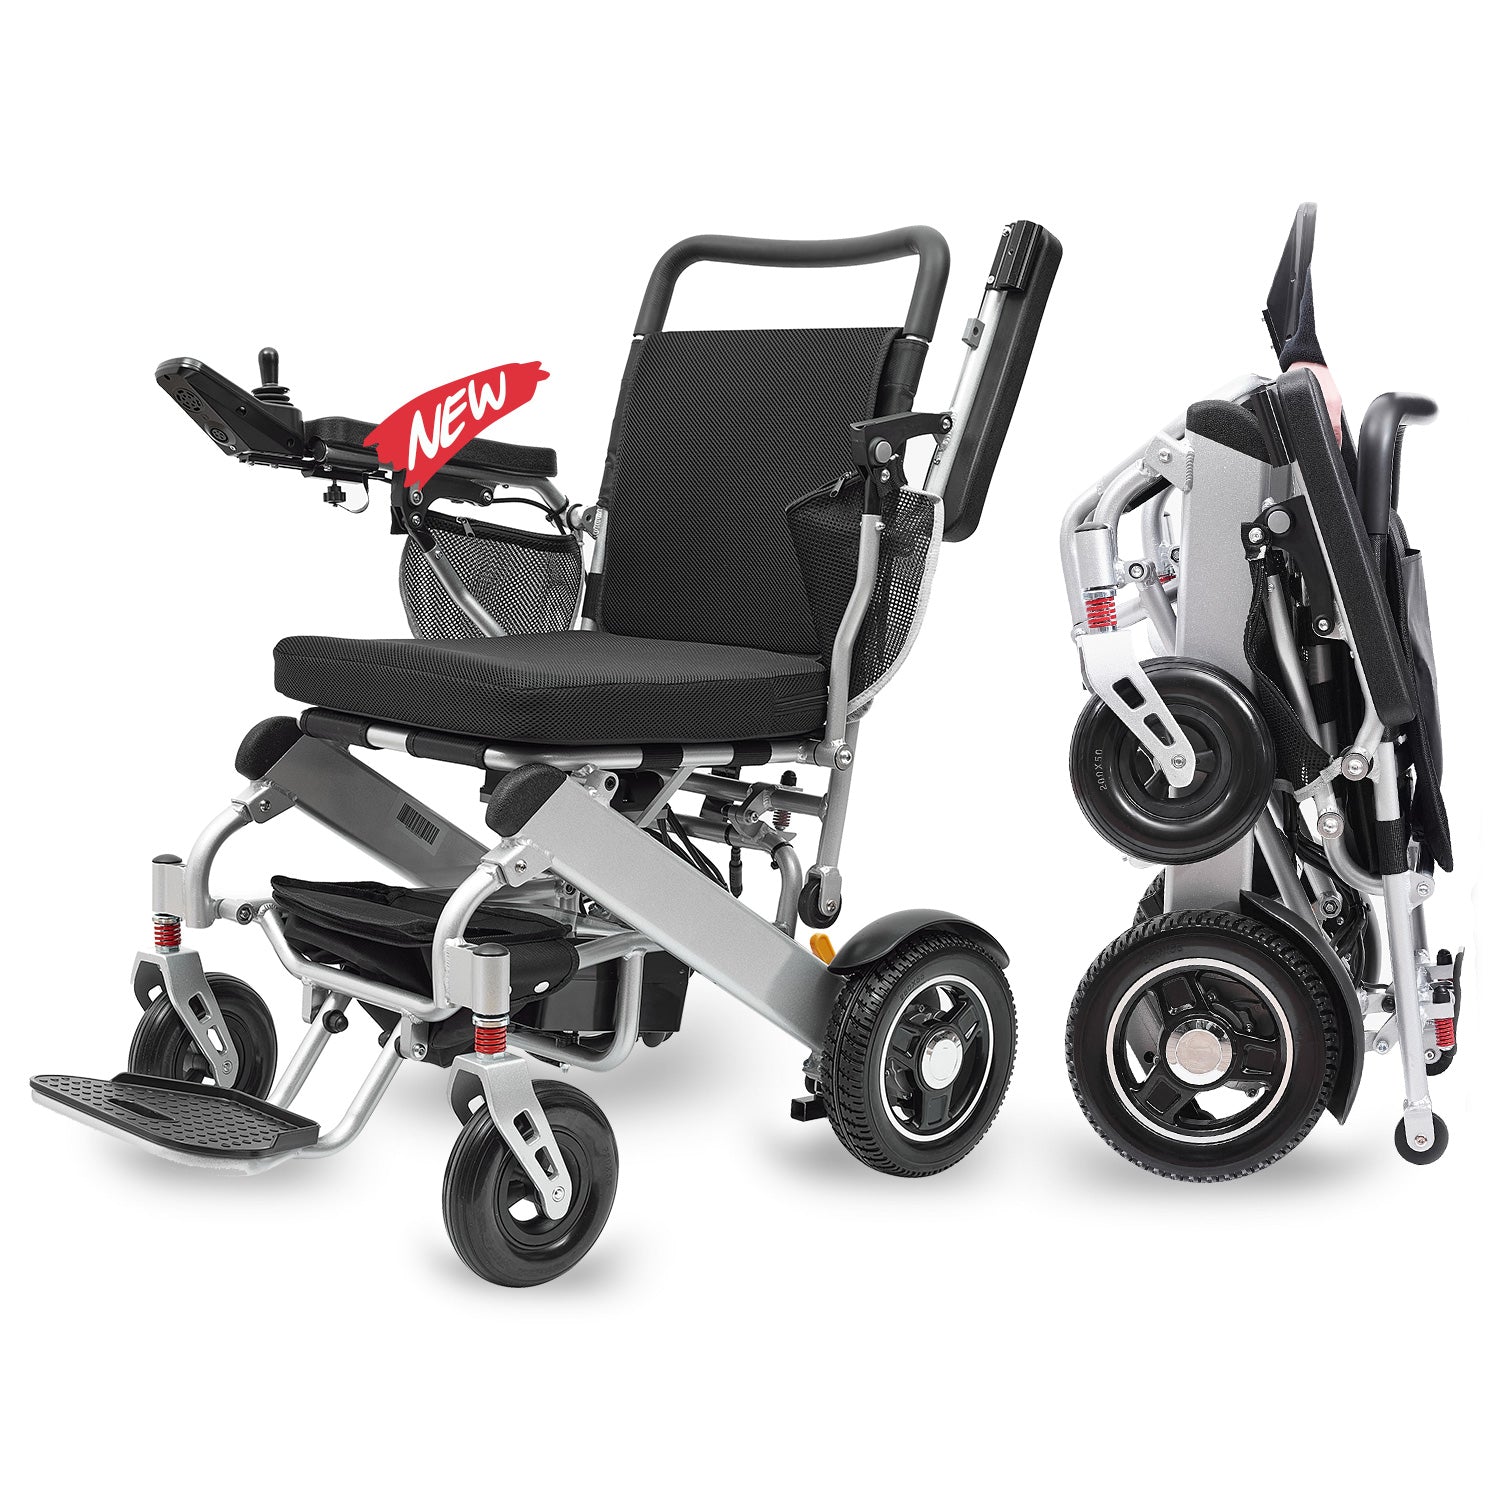 ActiWe WX15 Electric Wheelchair- Ultra-lightweight (Only 47l bs)- Brushless Super Power Motors-